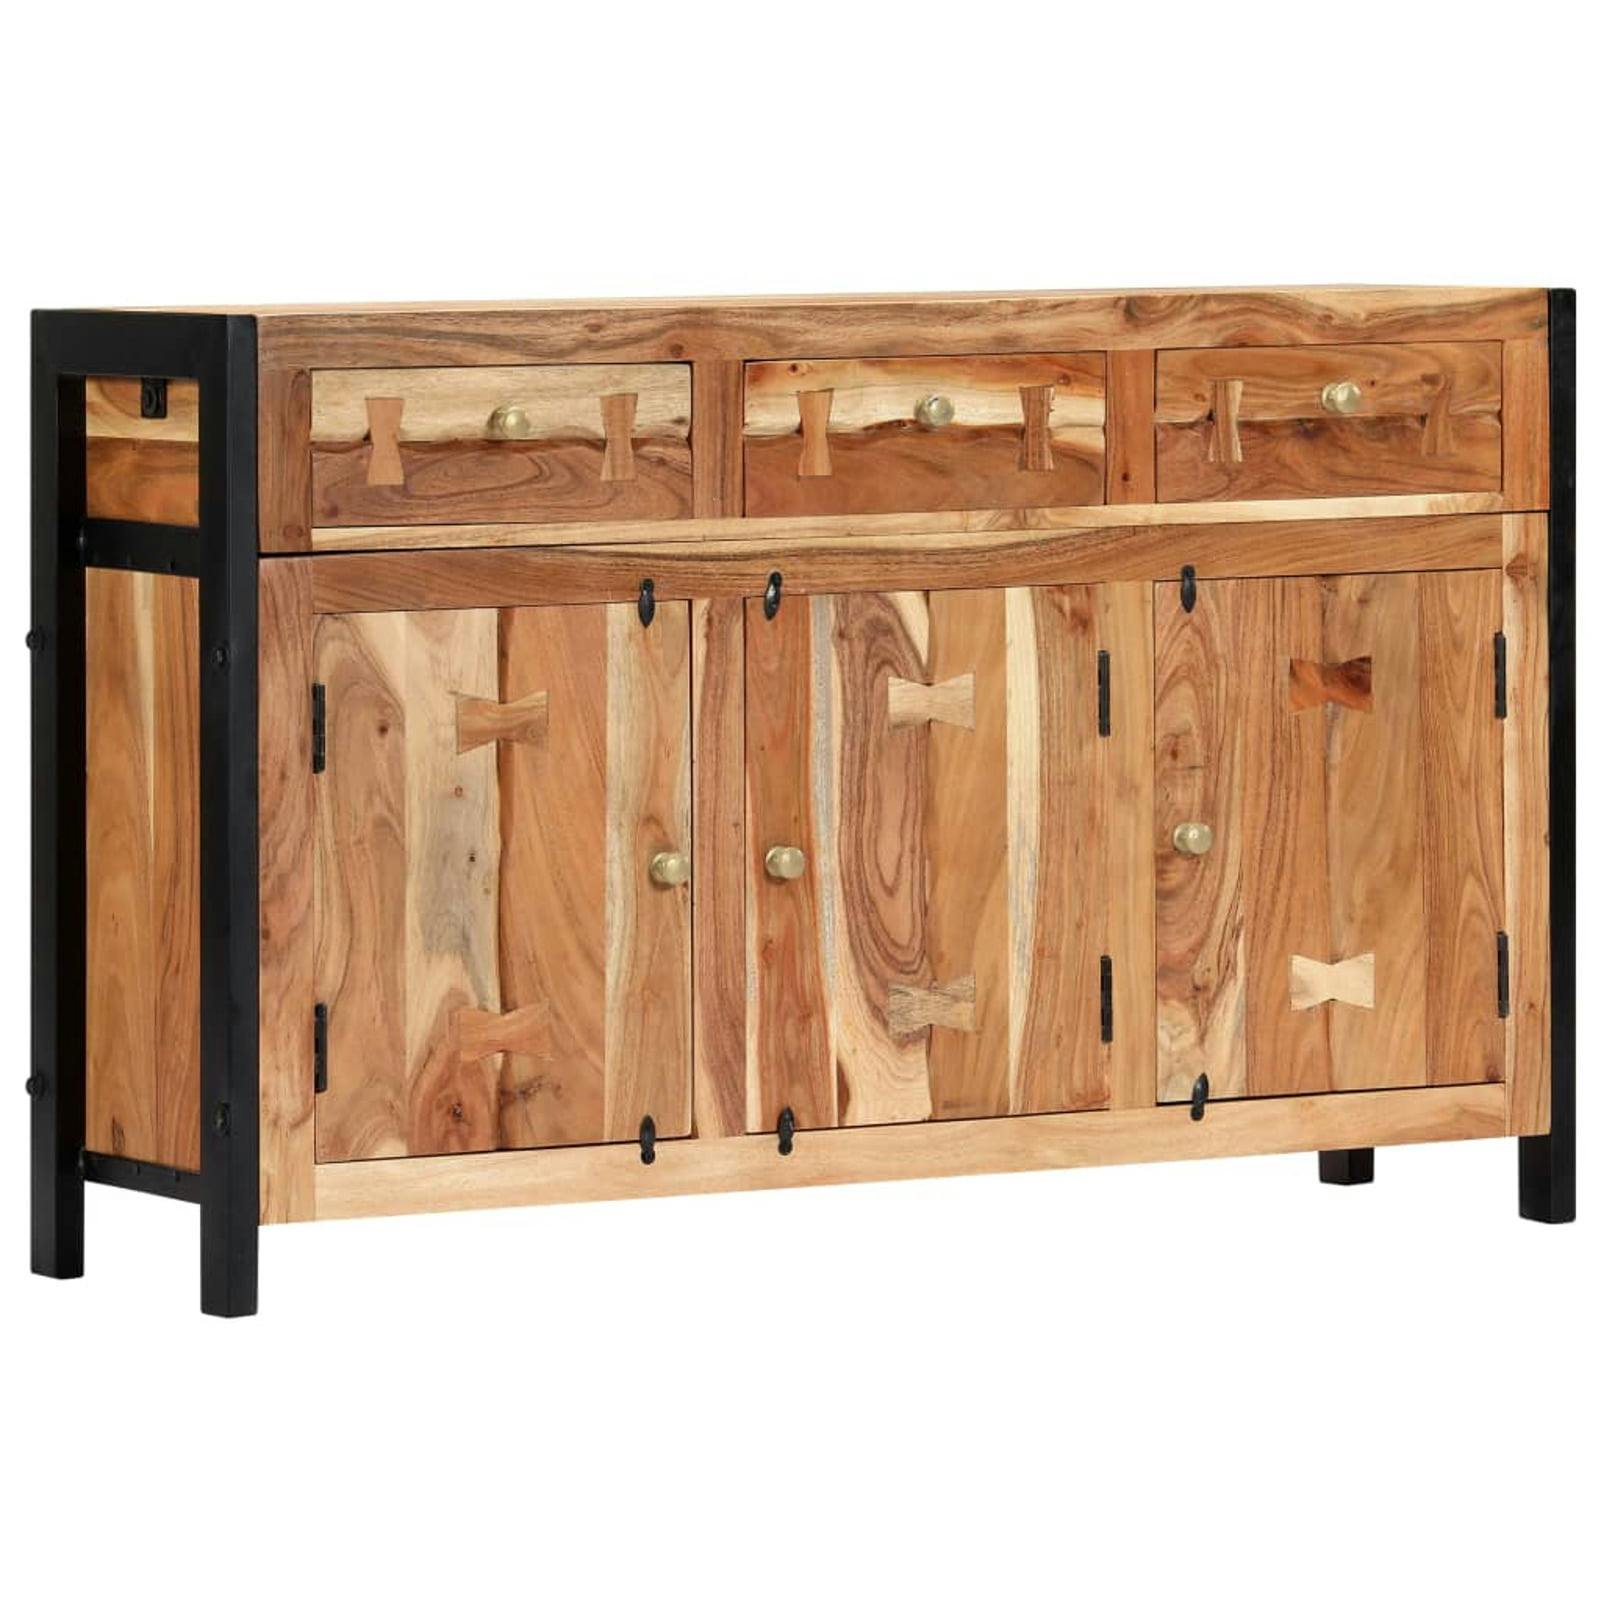 Handcrafted Acacia Wood Sideboard with Steel Legs - 47"x14"x30"